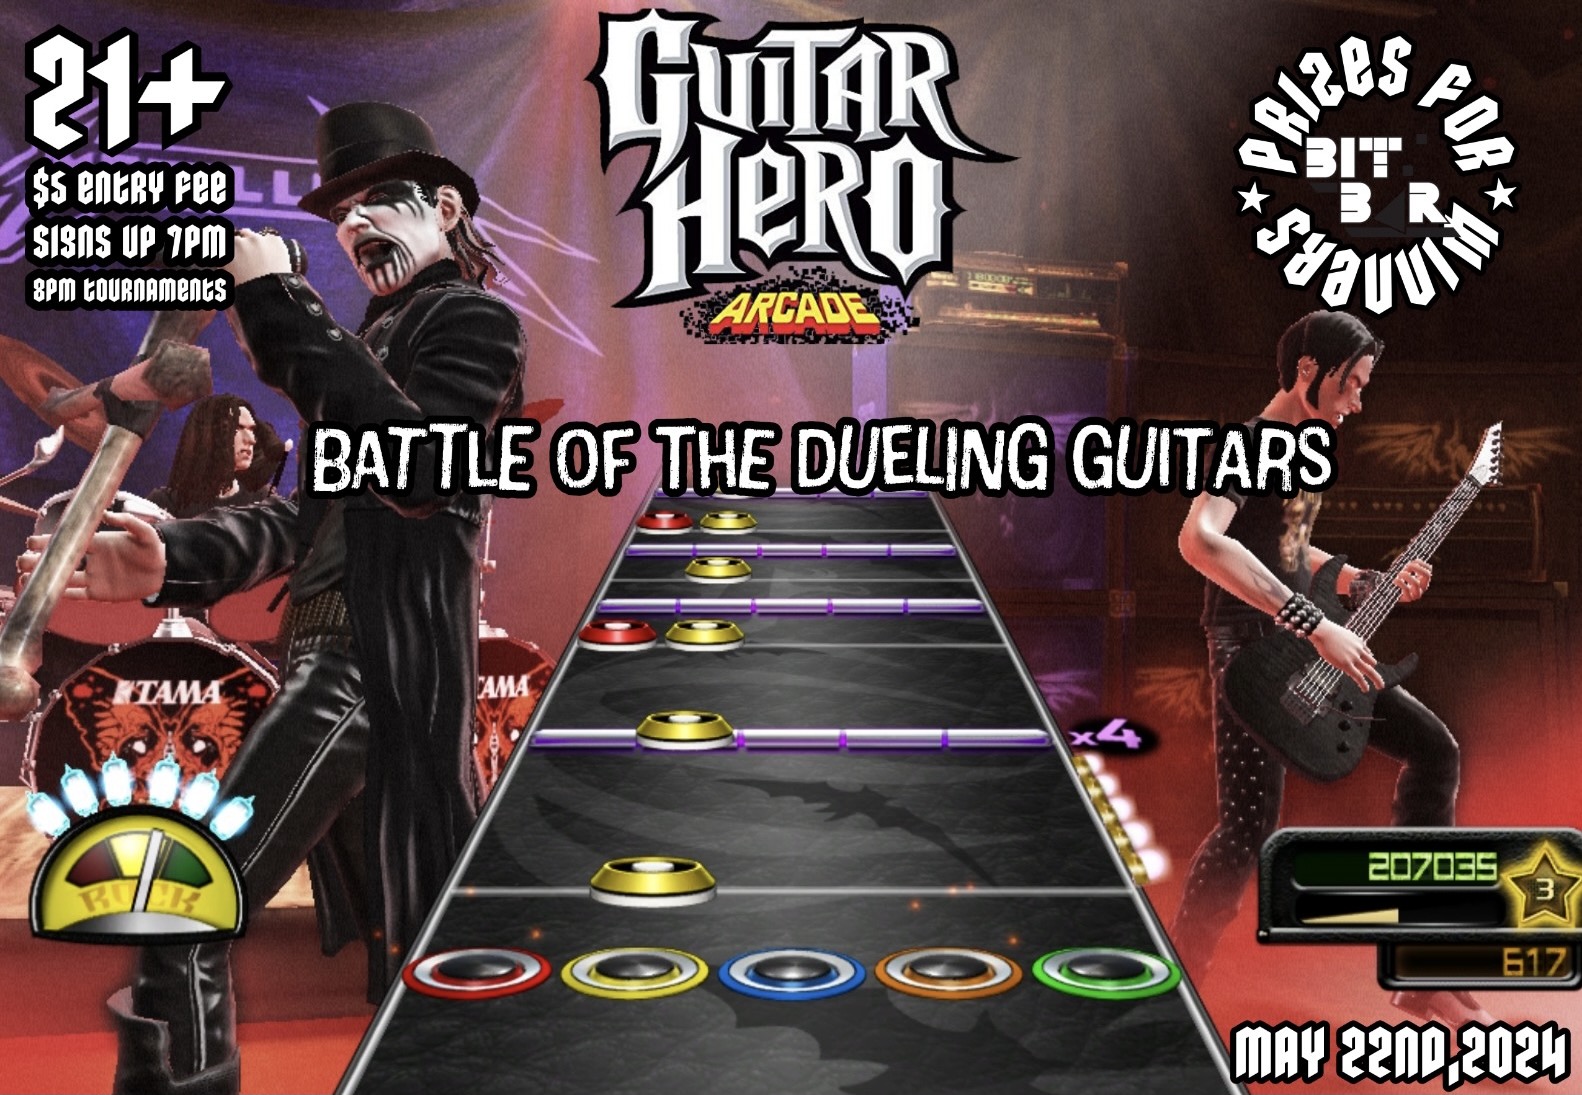 Experience the thrill of shredding riffs at our upcoming "Battle of Dueling Guitars" event. Steeped in the vibes of guitar hero arcade games, this happening will feature dynamic animated guitarists and a gameplay interface that commands your attention! Save the date – May 22nd, 2024. Let's let your inner rockstar take center stage!